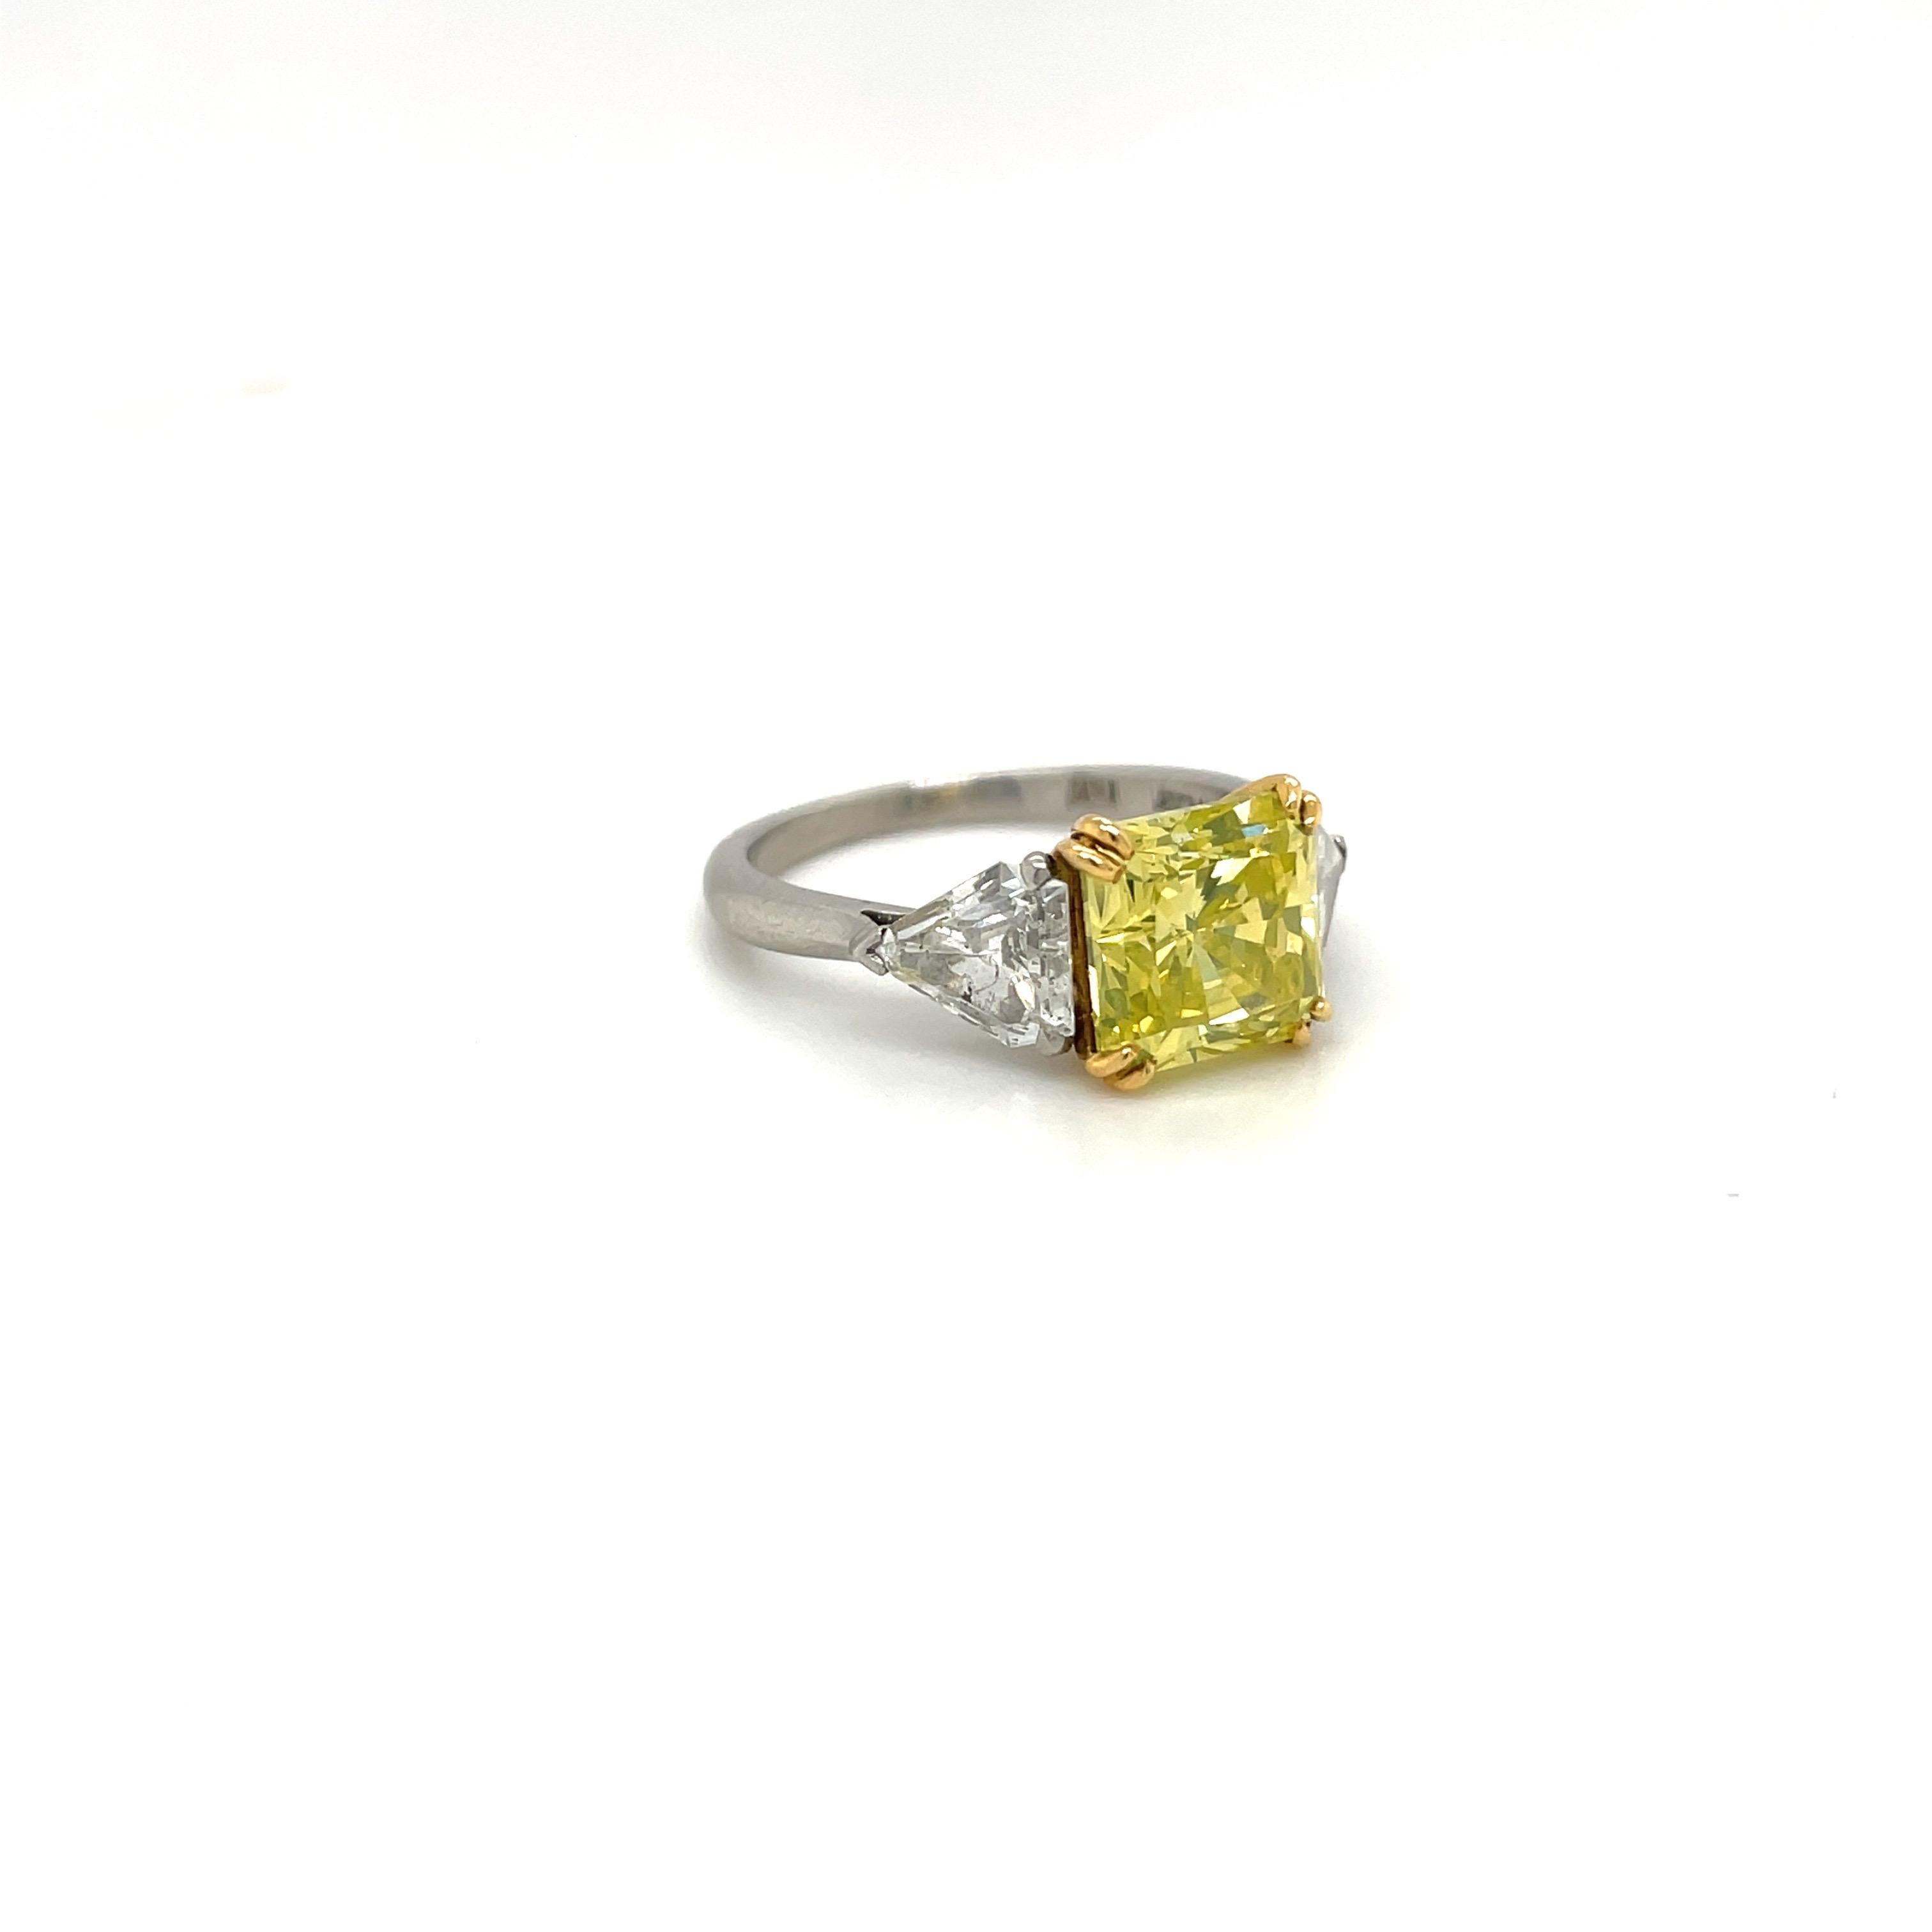 Taille radiant GIA Natural Fancy Intense 3,06Ct. Chartreuse - Diamant radiant en vente